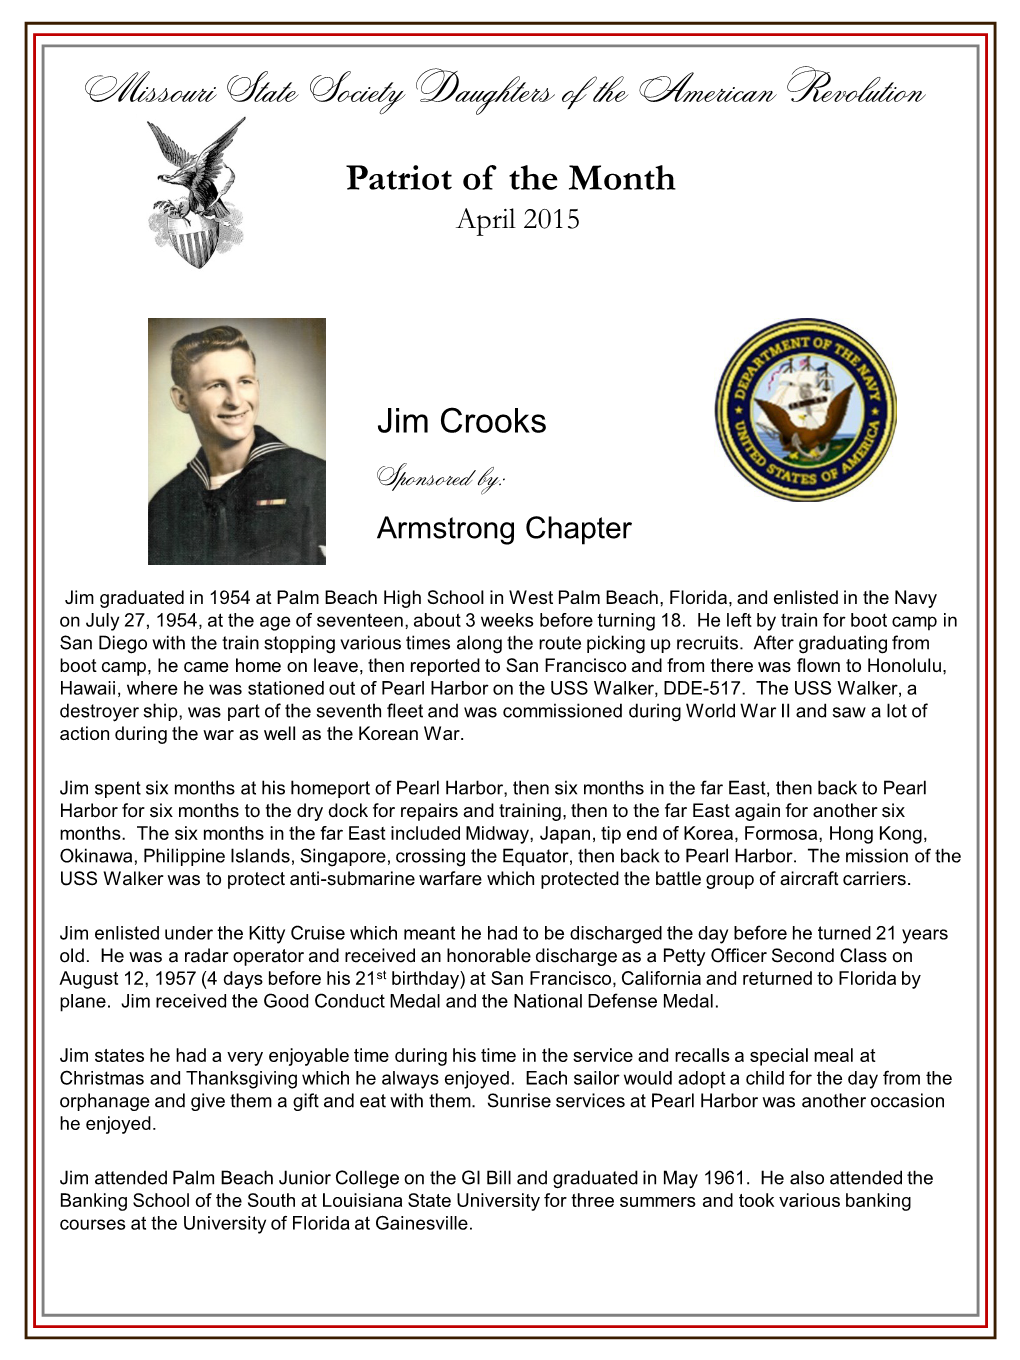 Jim Crooks Emblem Sponsored By: Armstrong Chapter